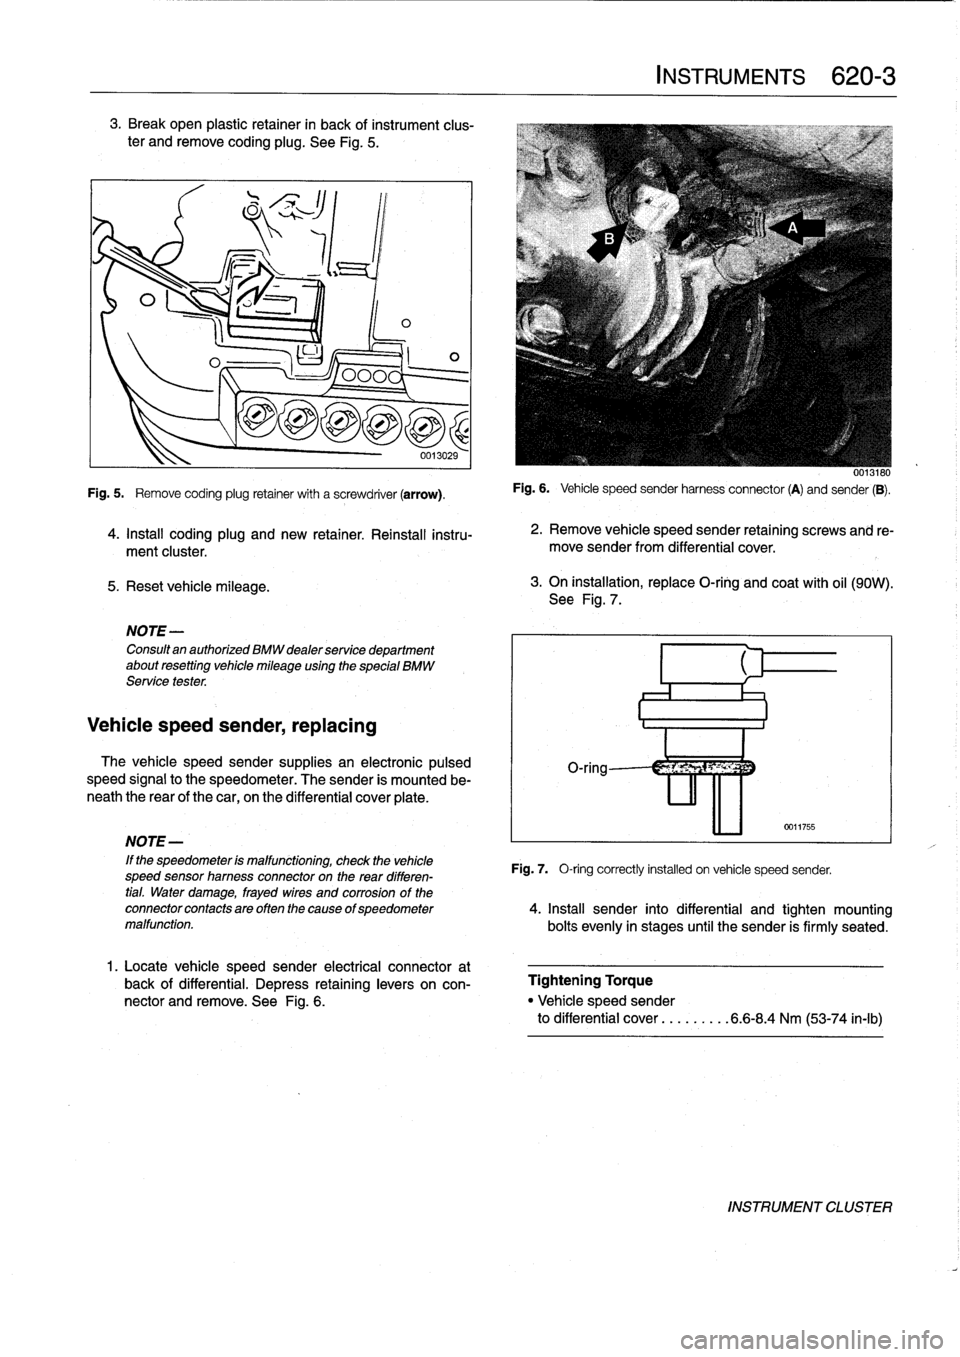 BMW 325i 1992 E36 Workshop Manual 3
.
Break
open
plastic
retainer
in
back
of
instrument
clus-
ter
andremove
coding
plug
.
See
Fig
.
5
.

5
.
Reset
vehicle
mileage
.

1
ILO

NOTE-

Consultan
authorized
BMW
dealer
service
department
abo